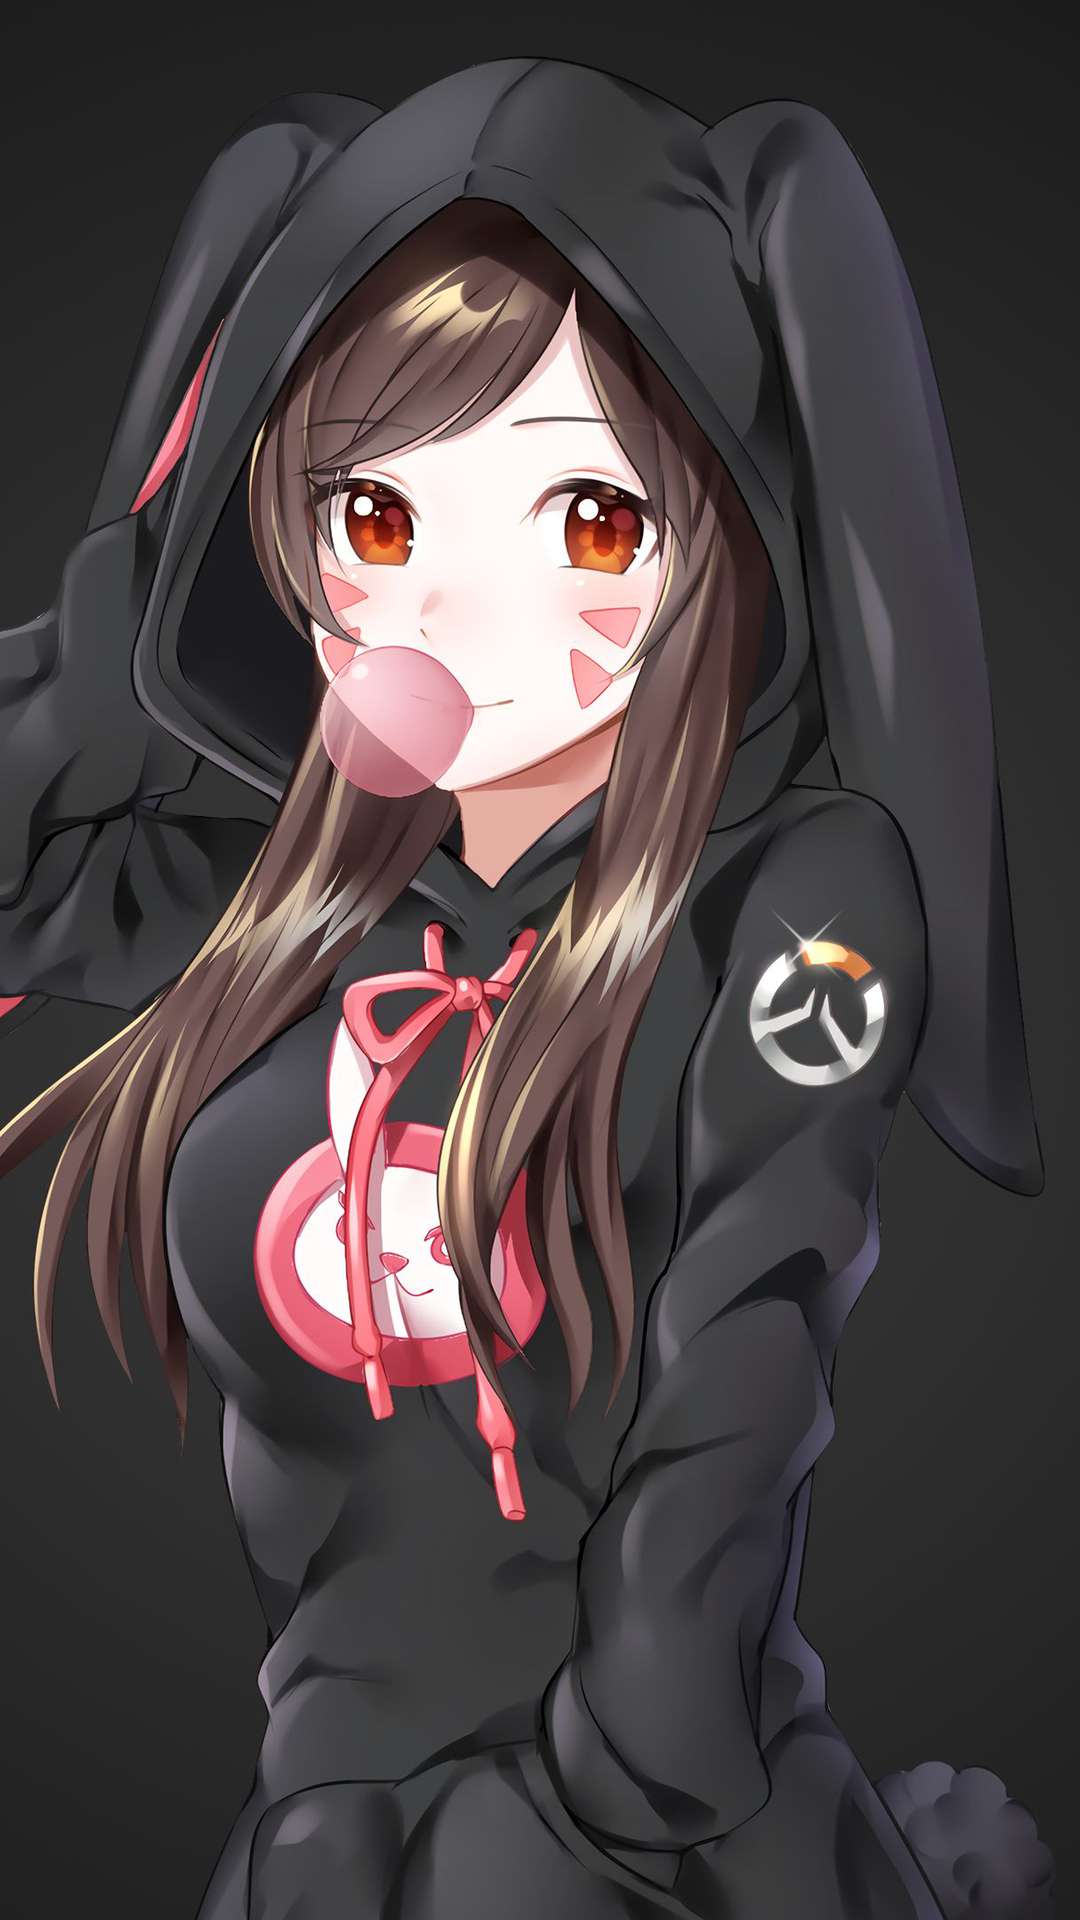 Hoodie Anime Girl Wallpaper for iPhone and Android